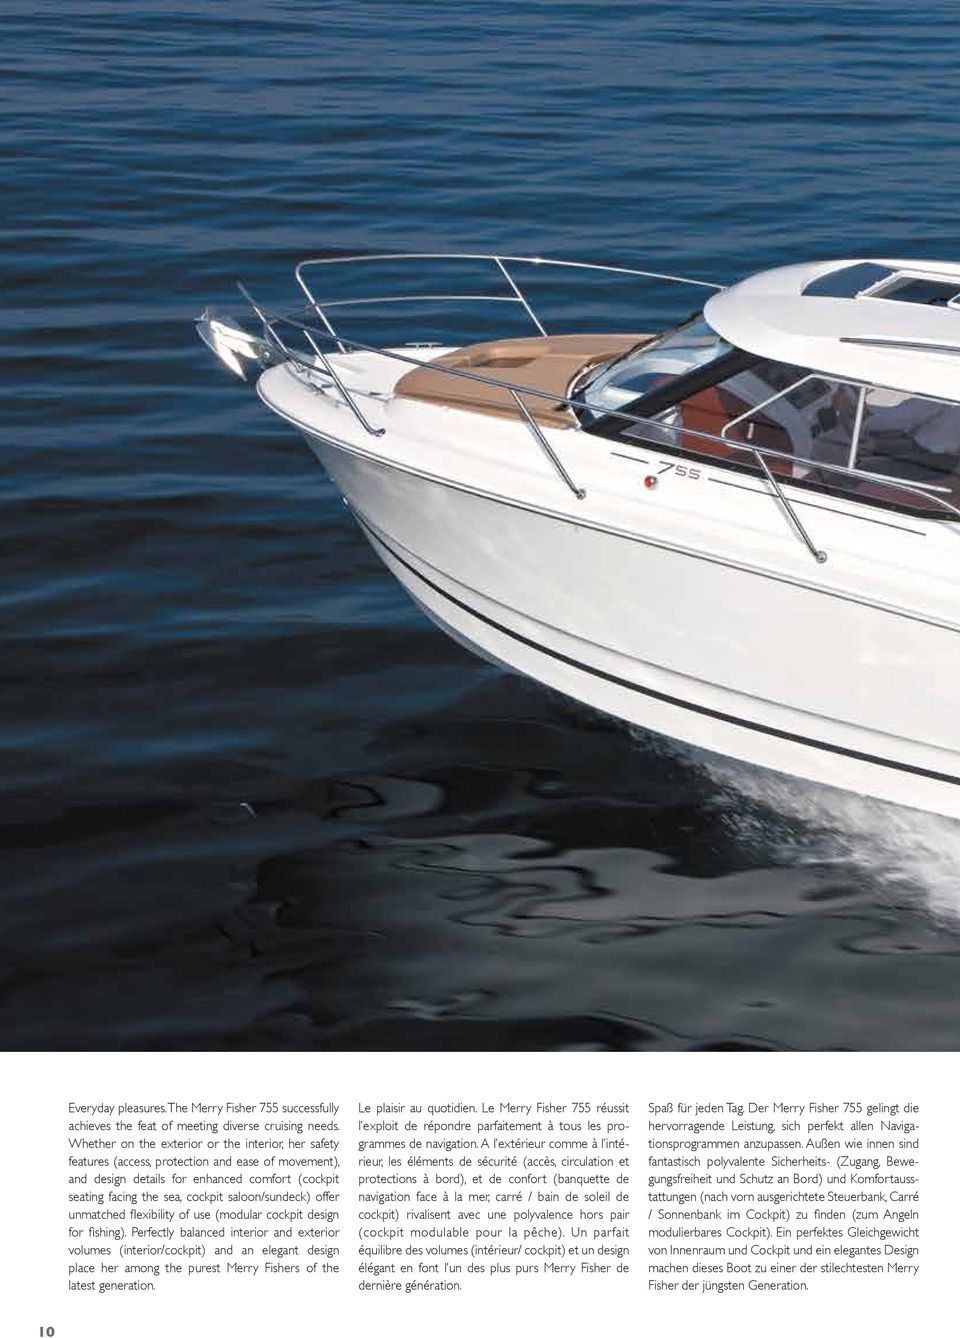 saloon/sundeck) offer unmatched flexibility of use (modular cockpit design for fishing).